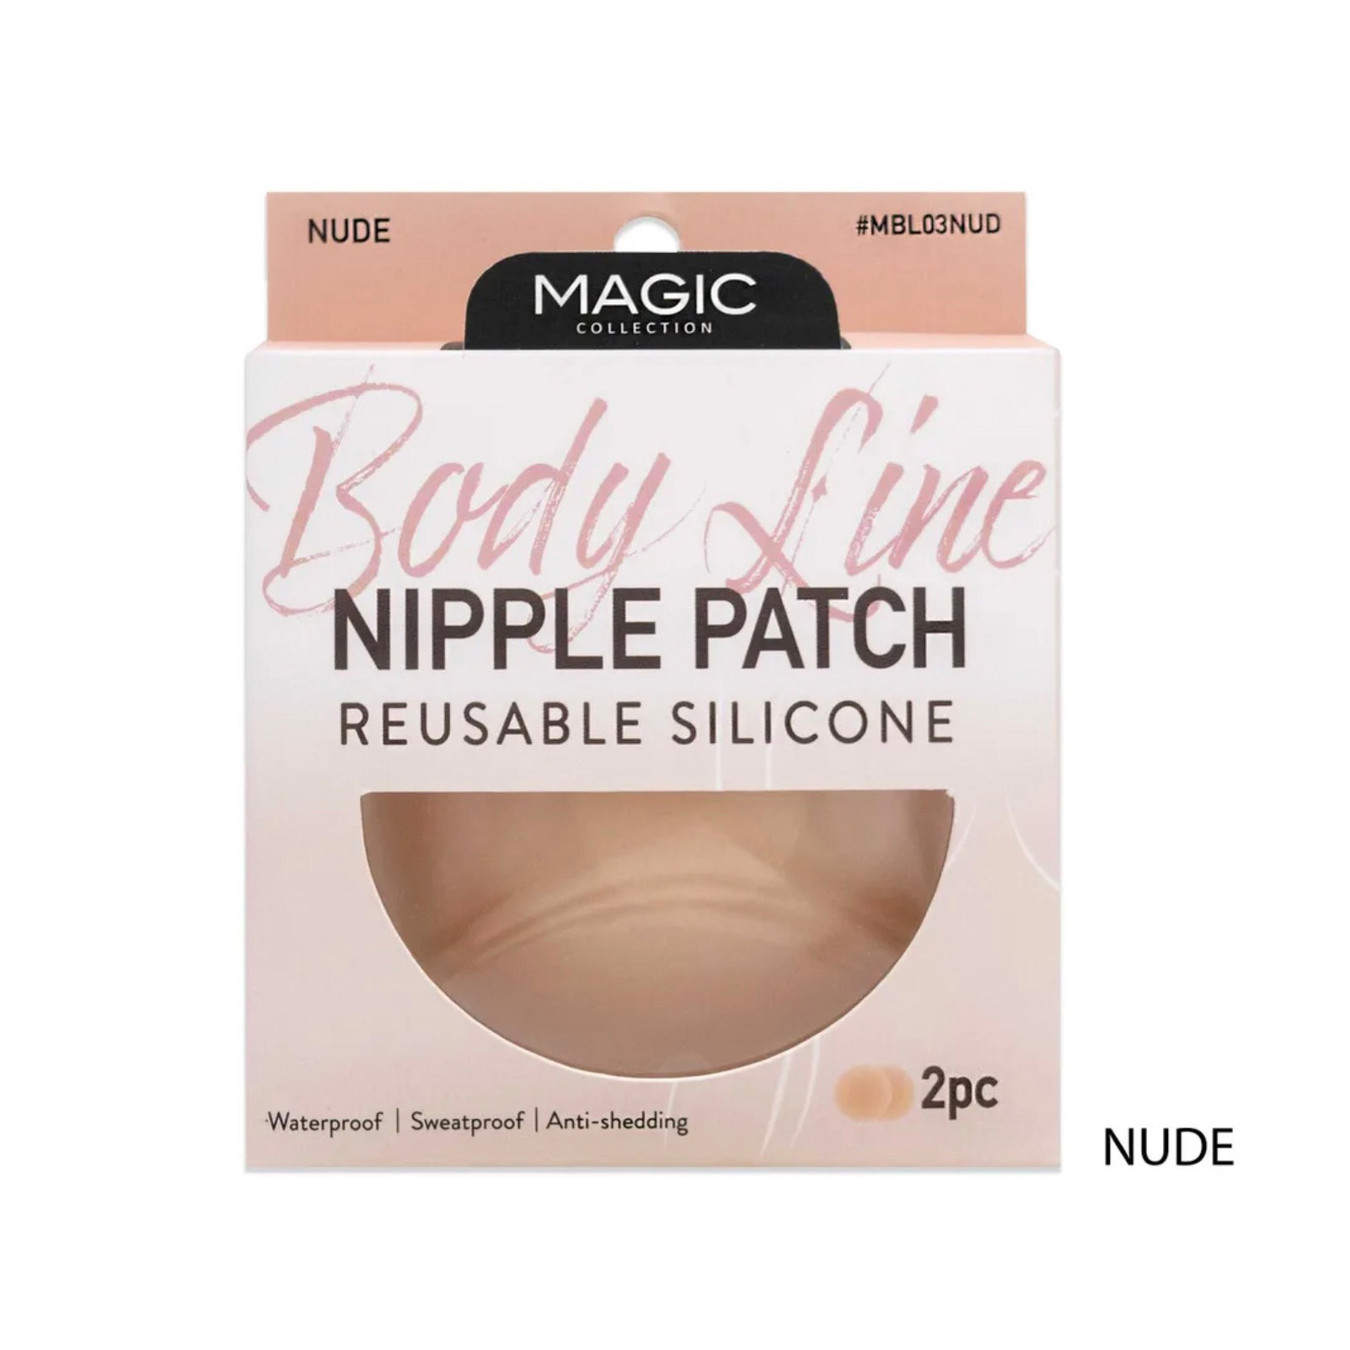 Magic Collection Nipple Patch (Reusable Silicone)